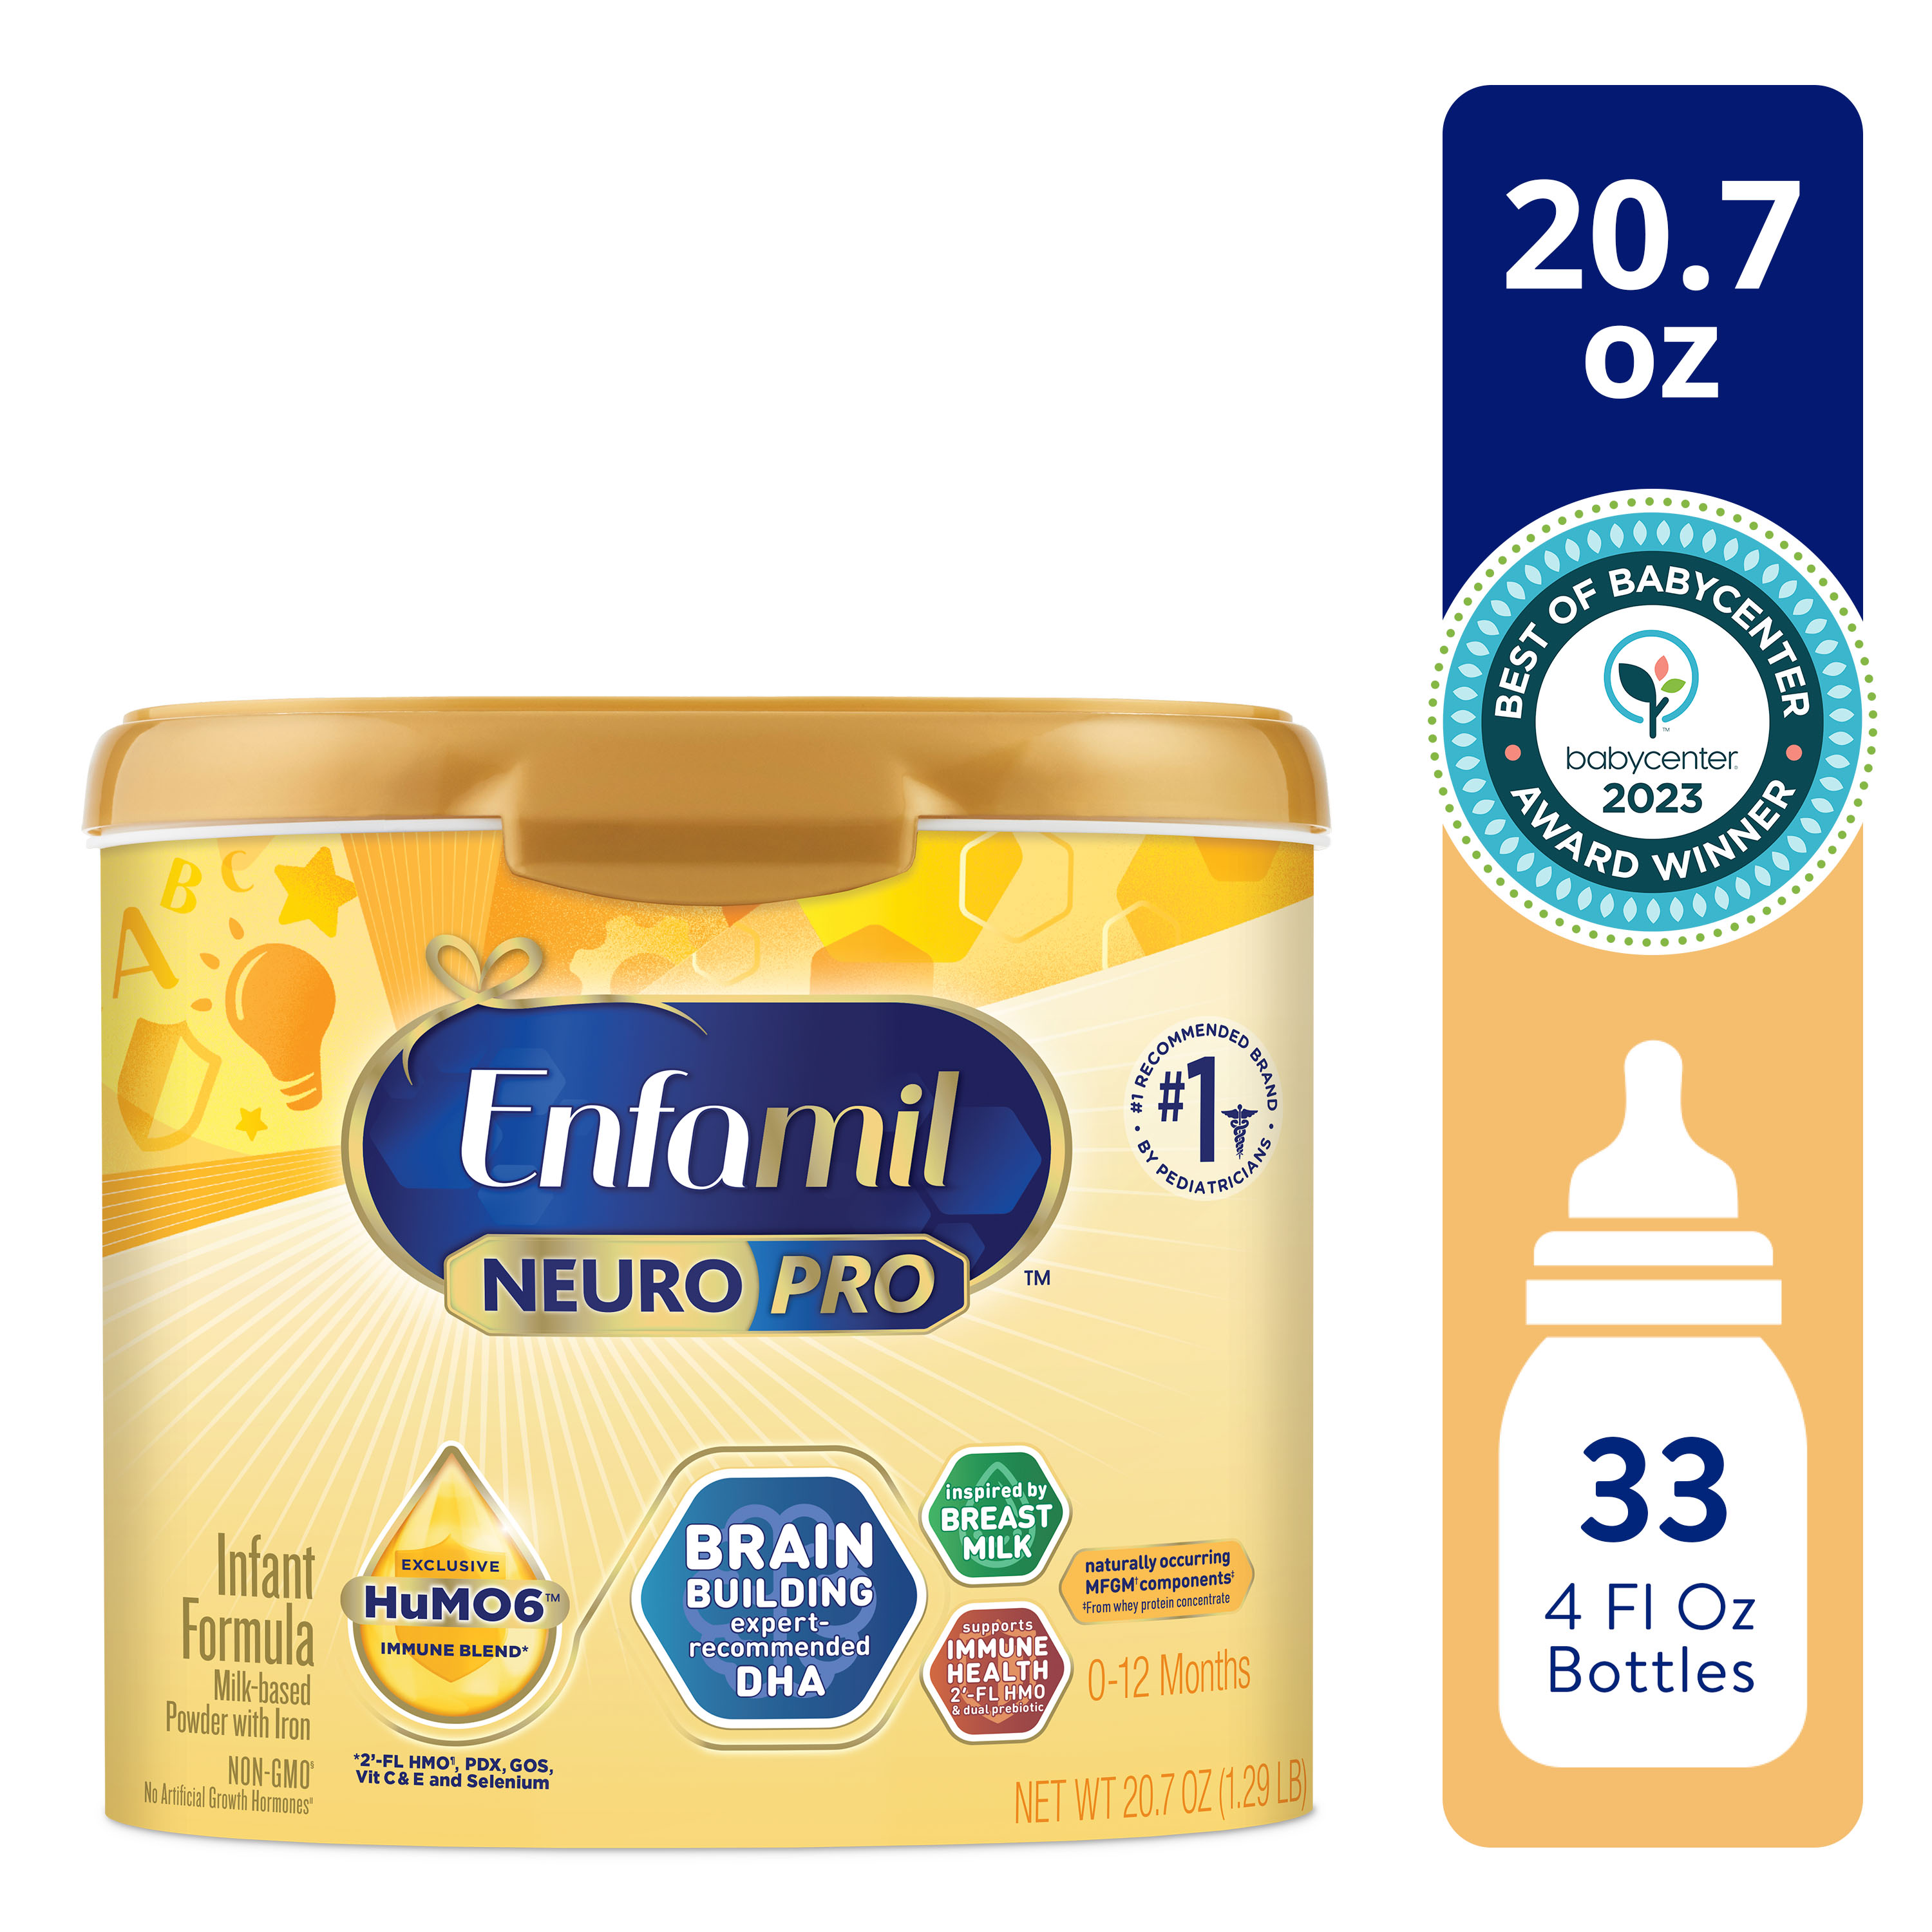 Enfamil NeuroPro Baby Formula, Milk-Based Infant Nutrition, MFGM* 5-Year Benefit, Expert-Recommended Brain-Building Omega-3 DHA, Exclusive HuMO6 Immune Blend, Non-GMO, 20.7 oz​ - image 1 of 15